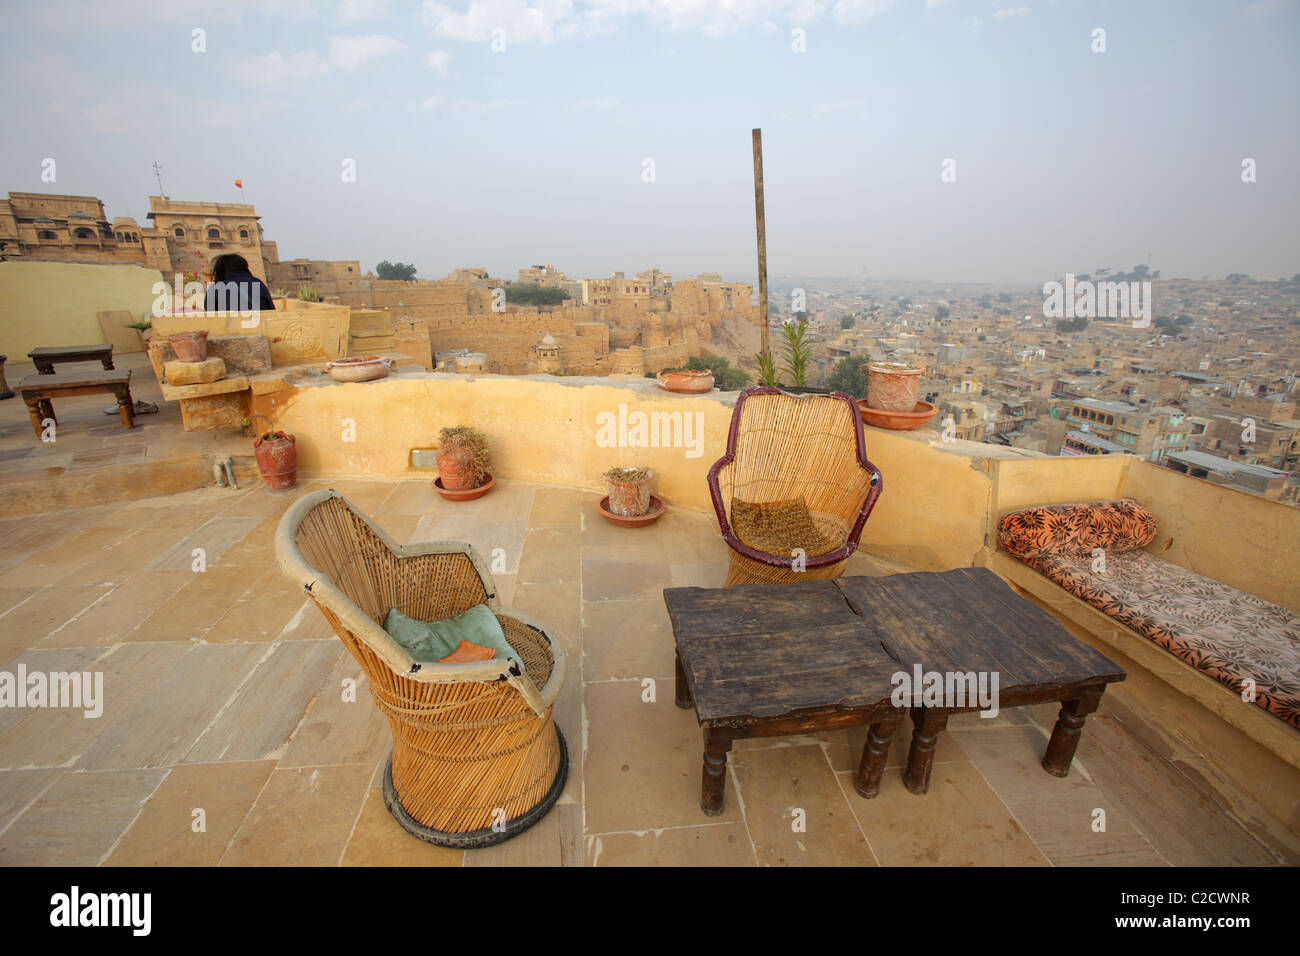 Hotel's table and chairs at Jaisalmer Fort, Jaisalmer, India Stock Photo